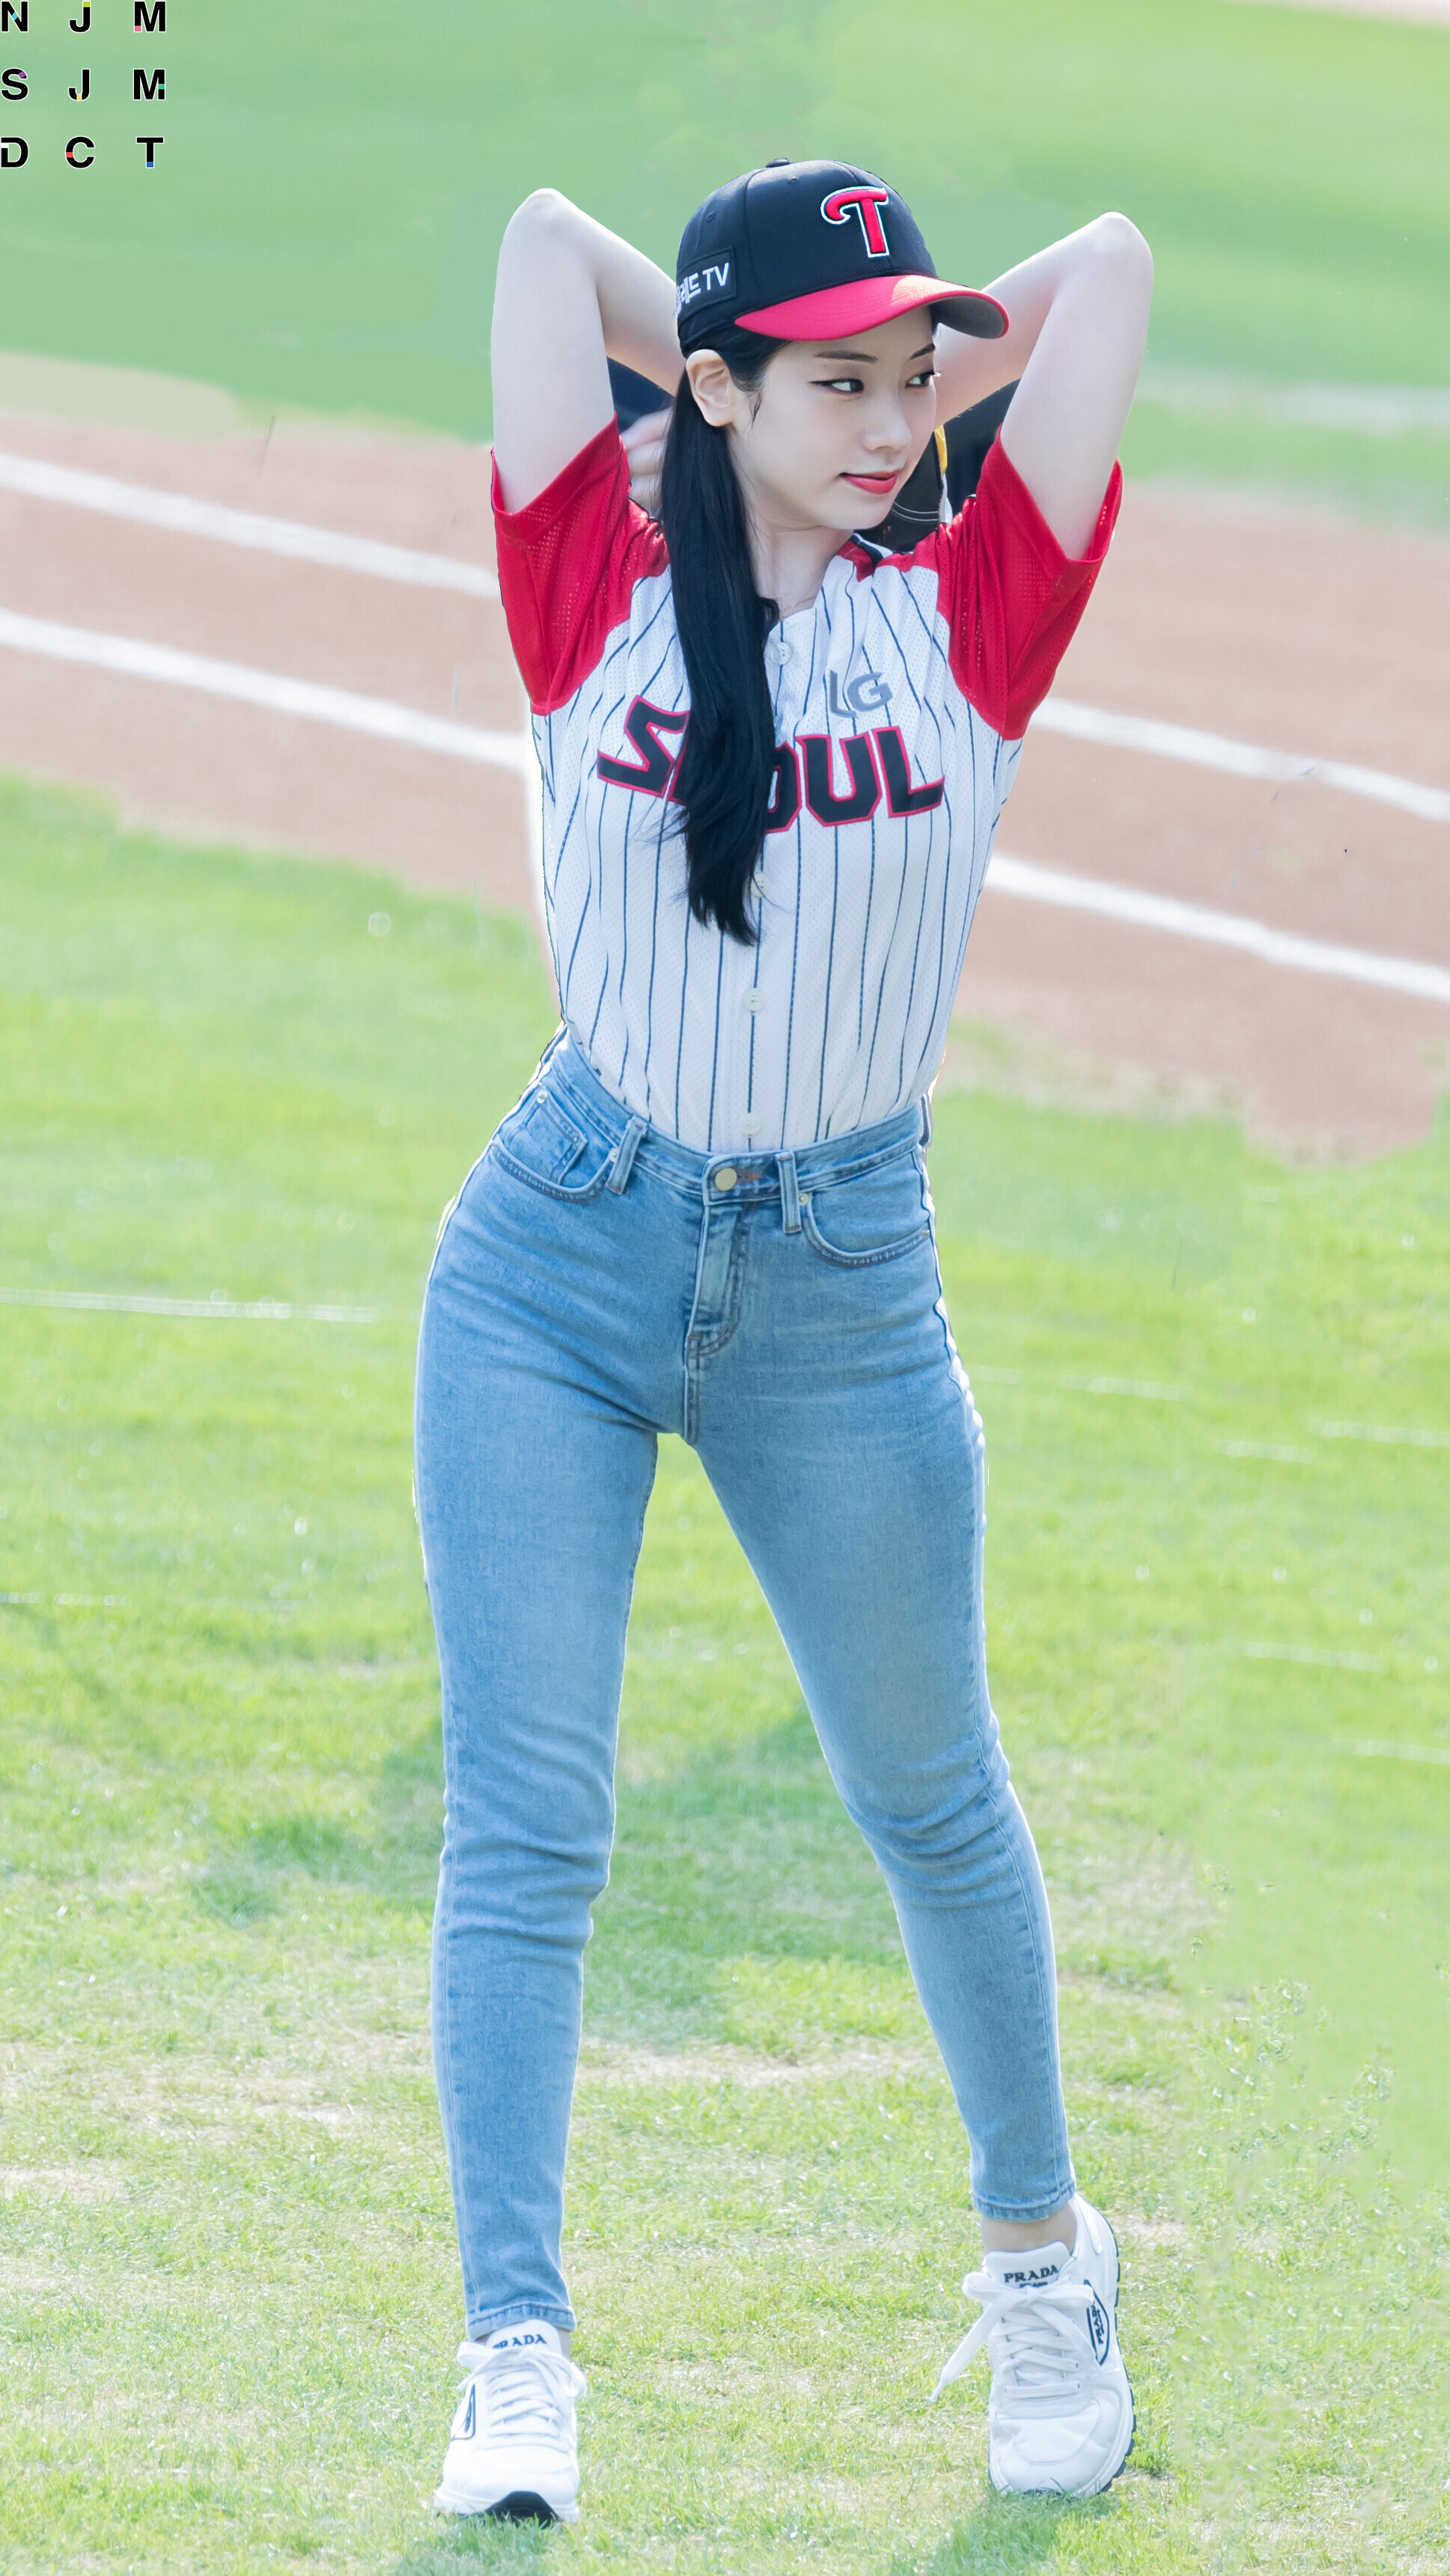 TWICE US - Dahyun throwing the first pitch at LG Twins